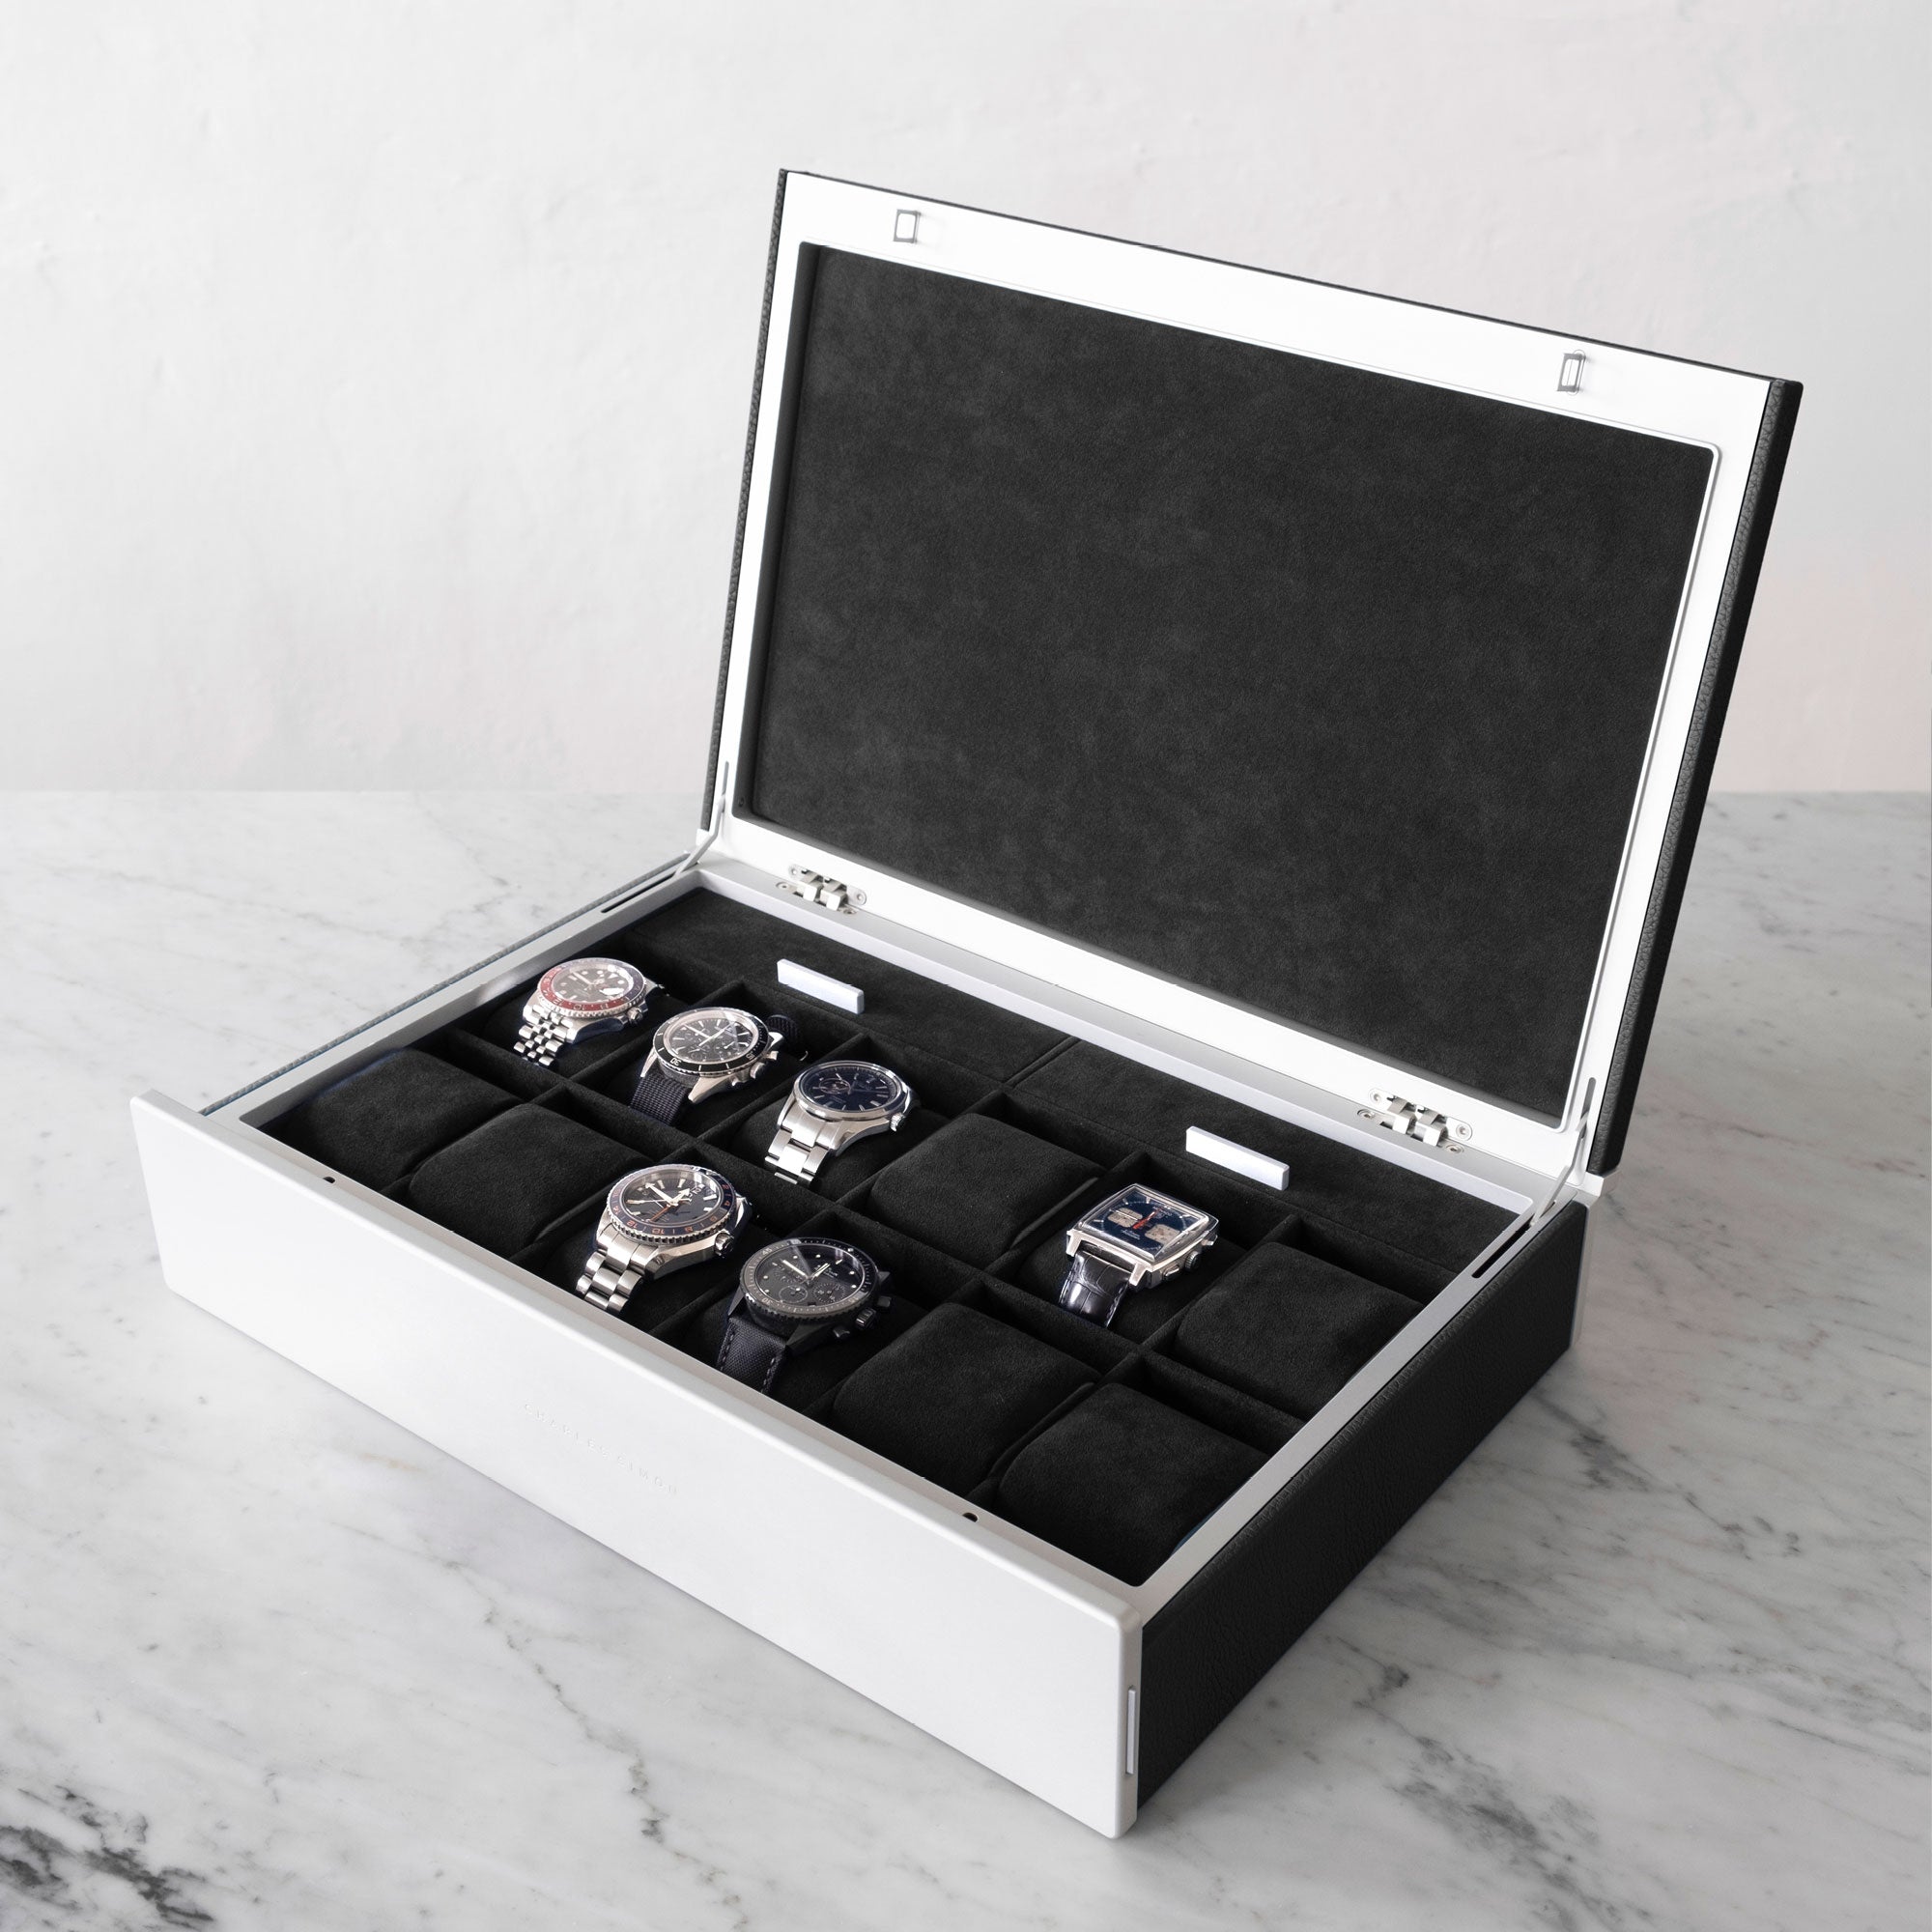 Lifestyle photo of Spence 12 Watch box for a watch collection of up to 12 watches in black leather and black Alcantara interior